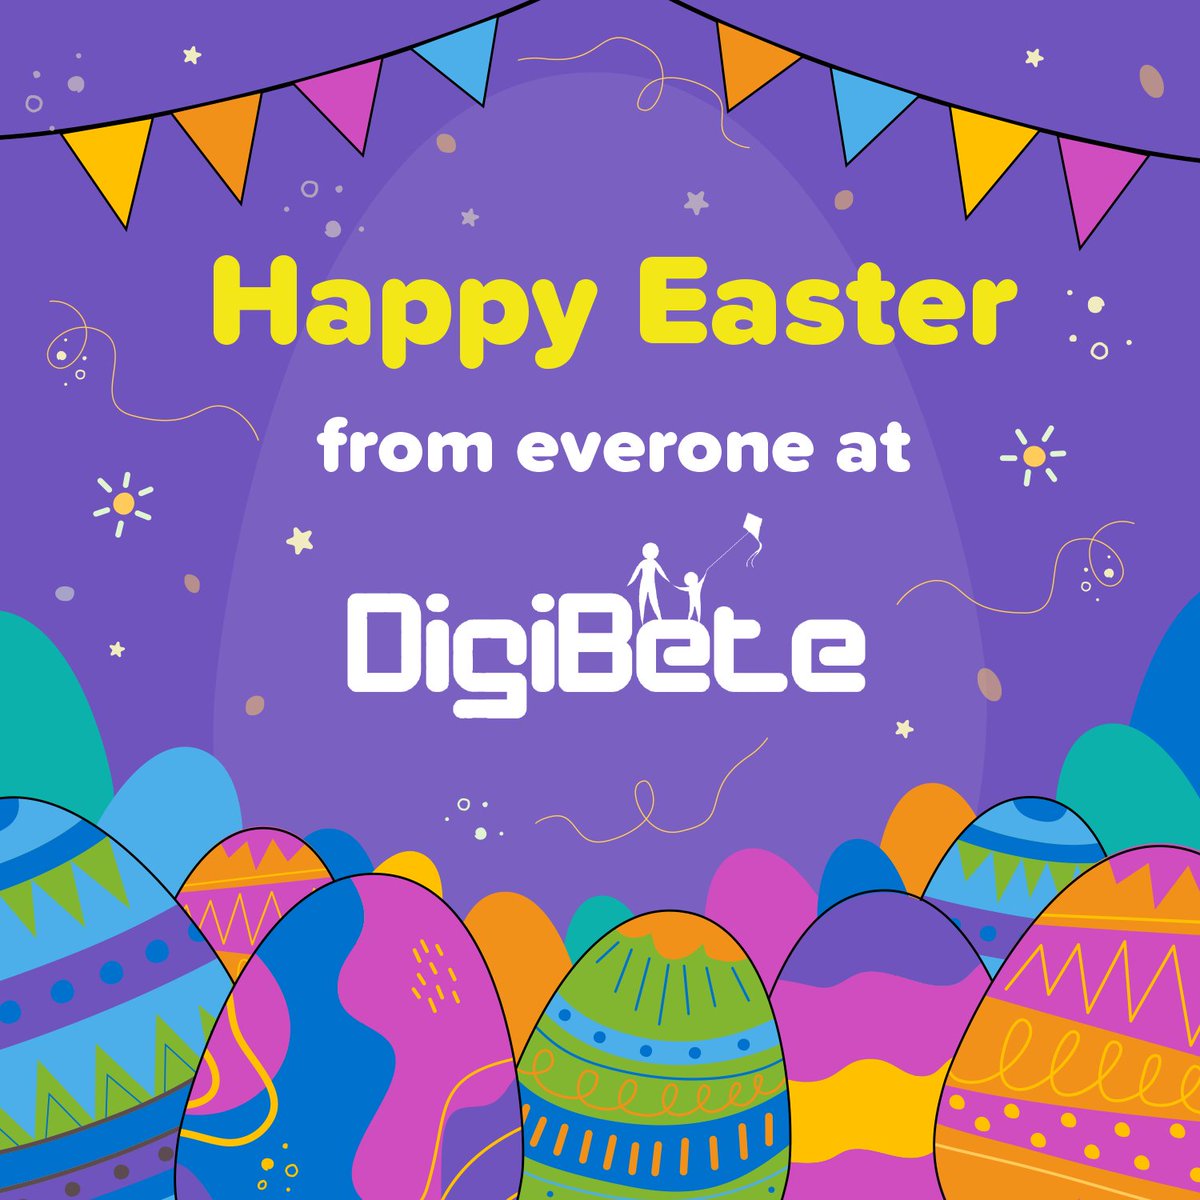 🌻Happy #Easter from everyone at #DigiBete🌻

Remember that you can access your YoungType2 #App from #DigiBete 24/7 over the holiday period. 

🔗youngtype2.org

#Type2diabetes #T2D #Diabetes #ClinicallyApproved #CommunityLed 💙